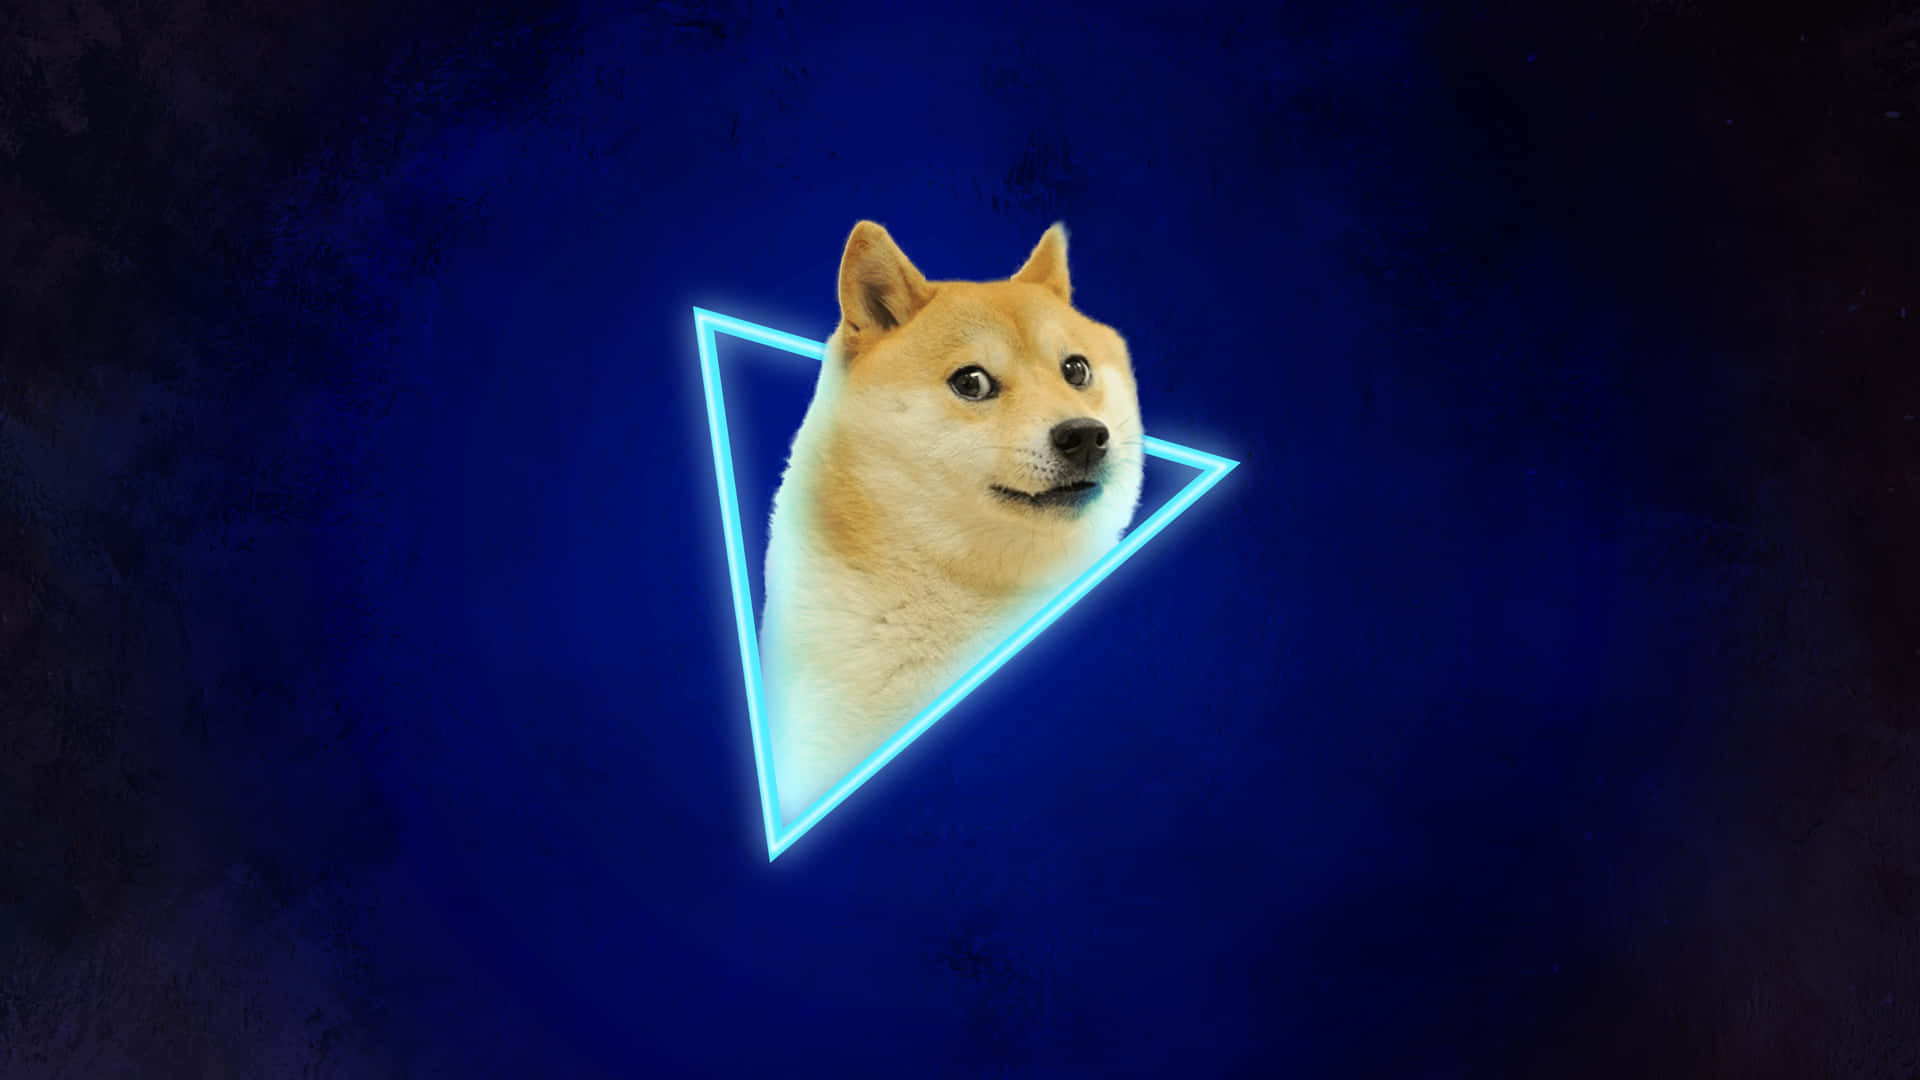 Free Doge Wallpaper Downloads, [100+] Doge Wallpapers for FREE | Wallpapers .com